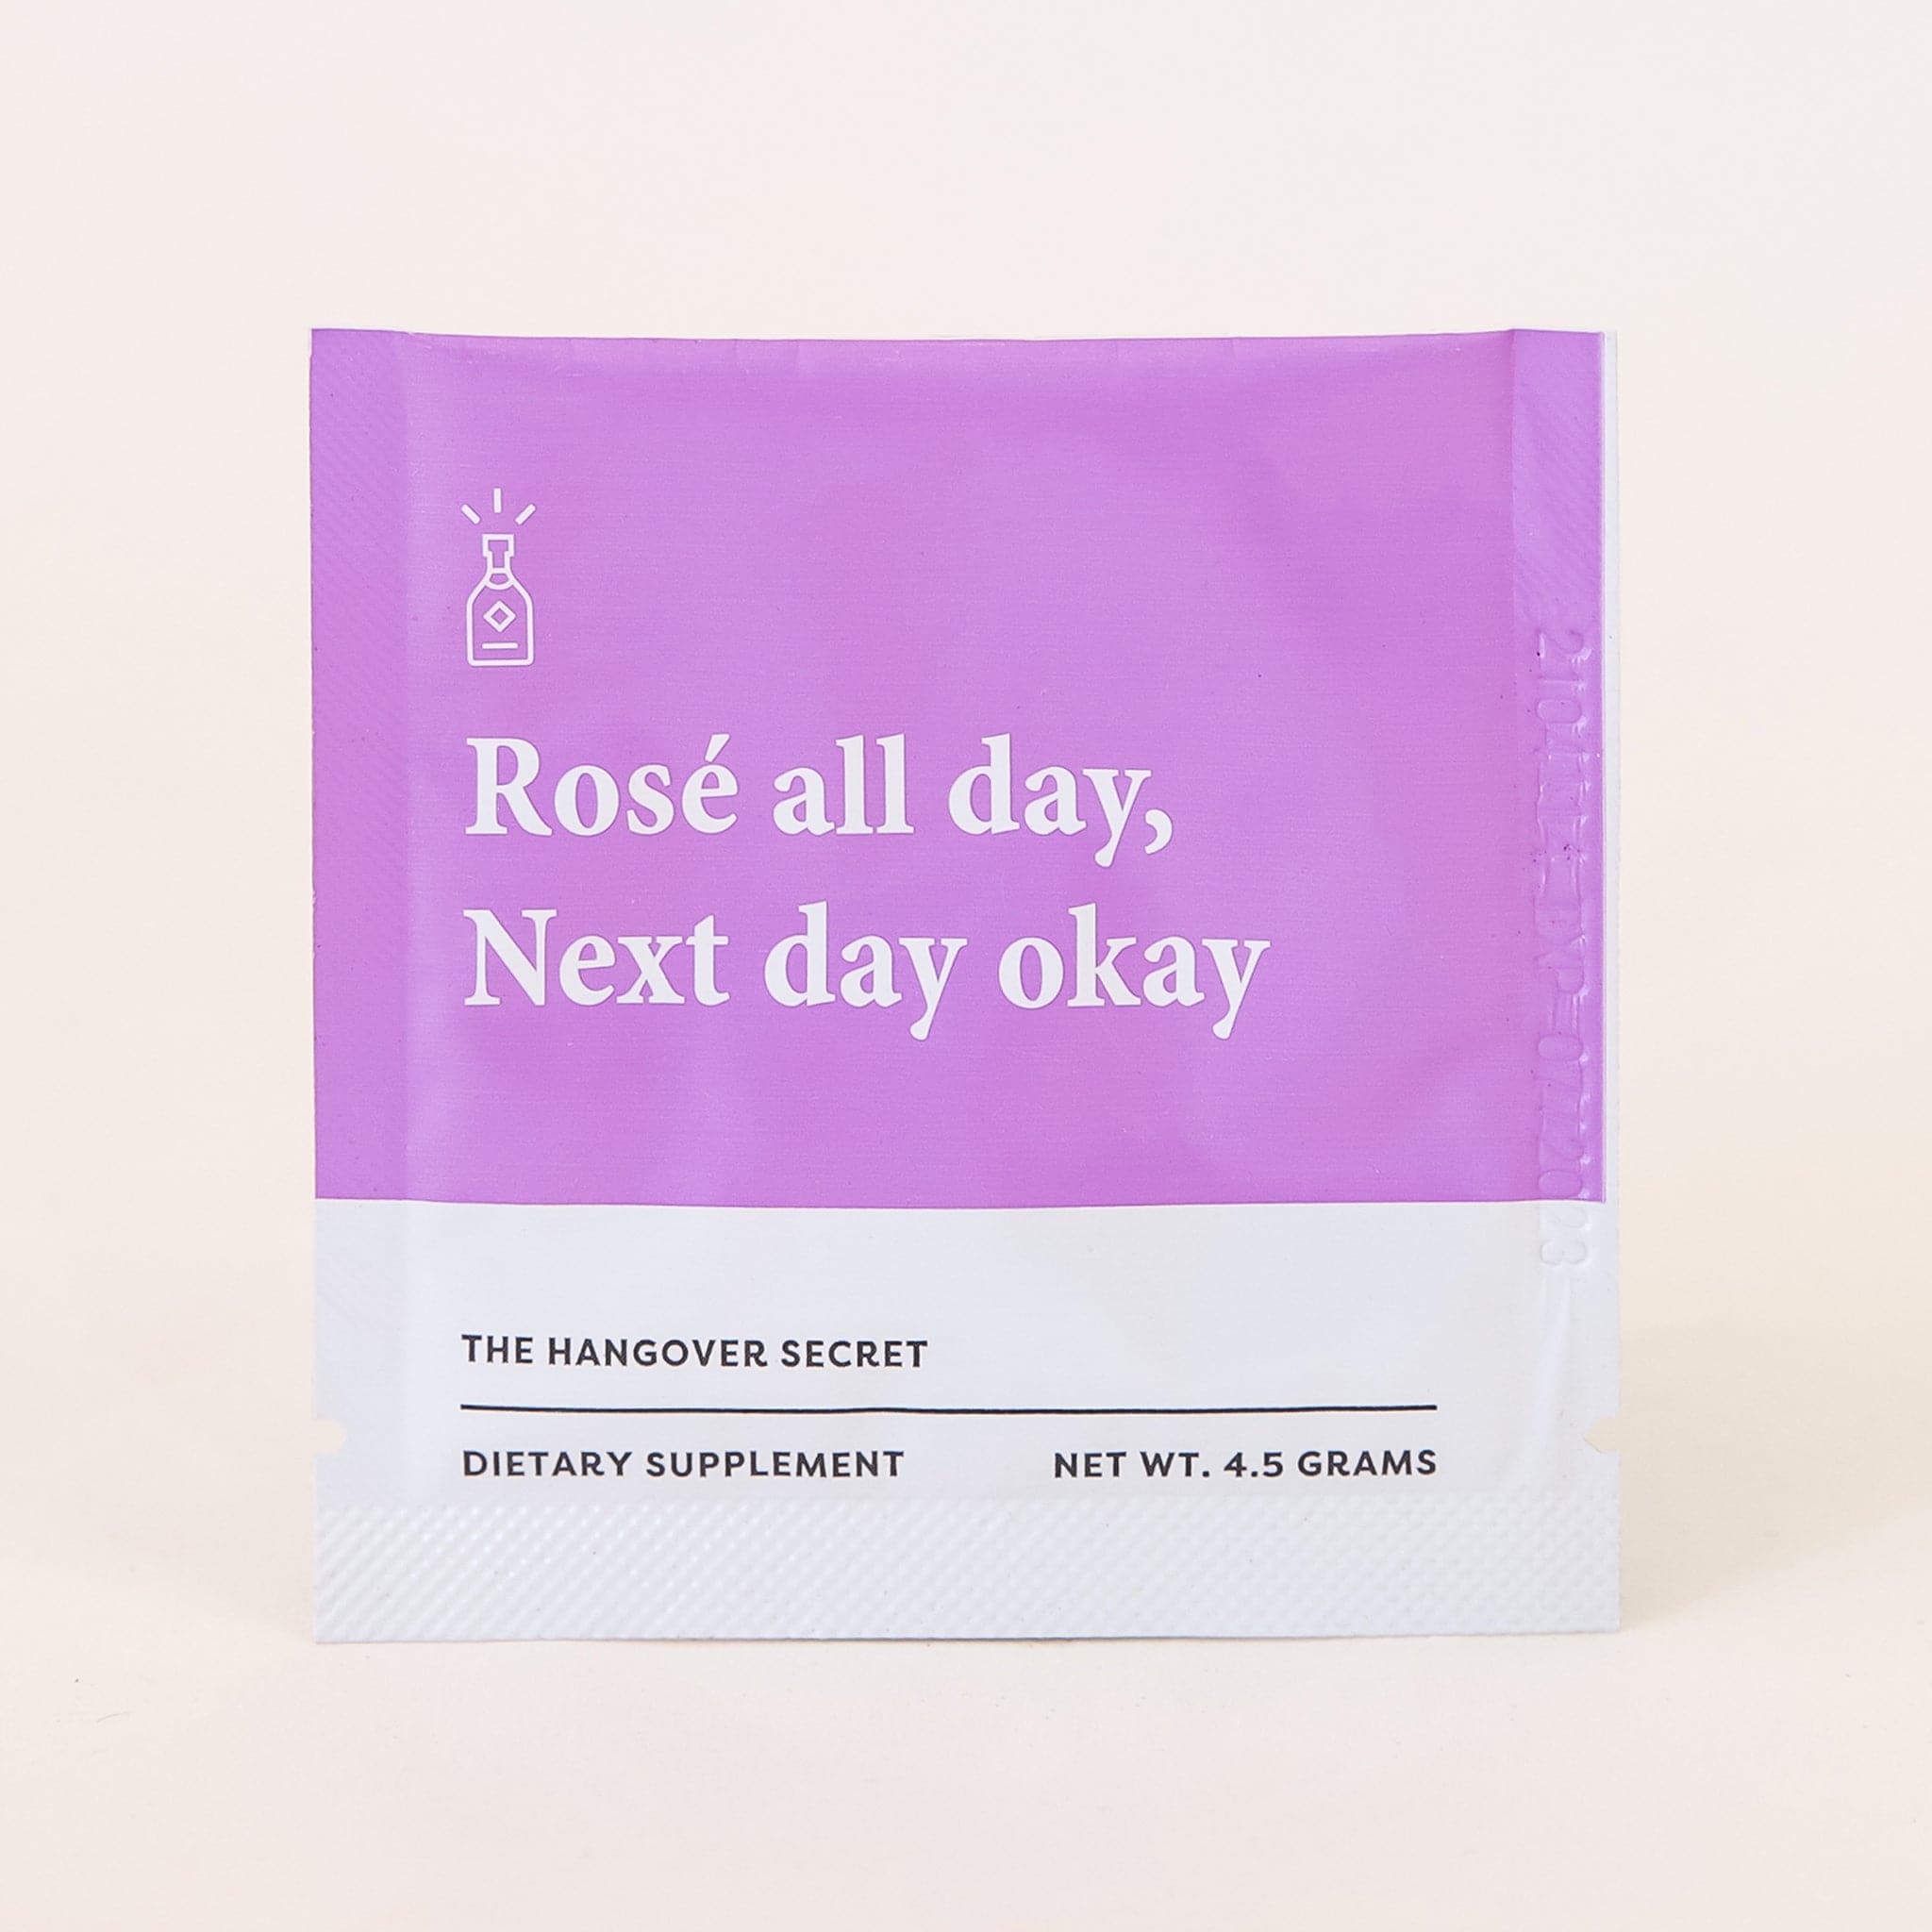 A small packet filled with a dietary supplement. The packaging's top half is a bright purple and the bottom half is white. There is text across the front that reads, "Rosé all day, Next day okay" as well as "The Hangover Secret | Dietary Supplement".